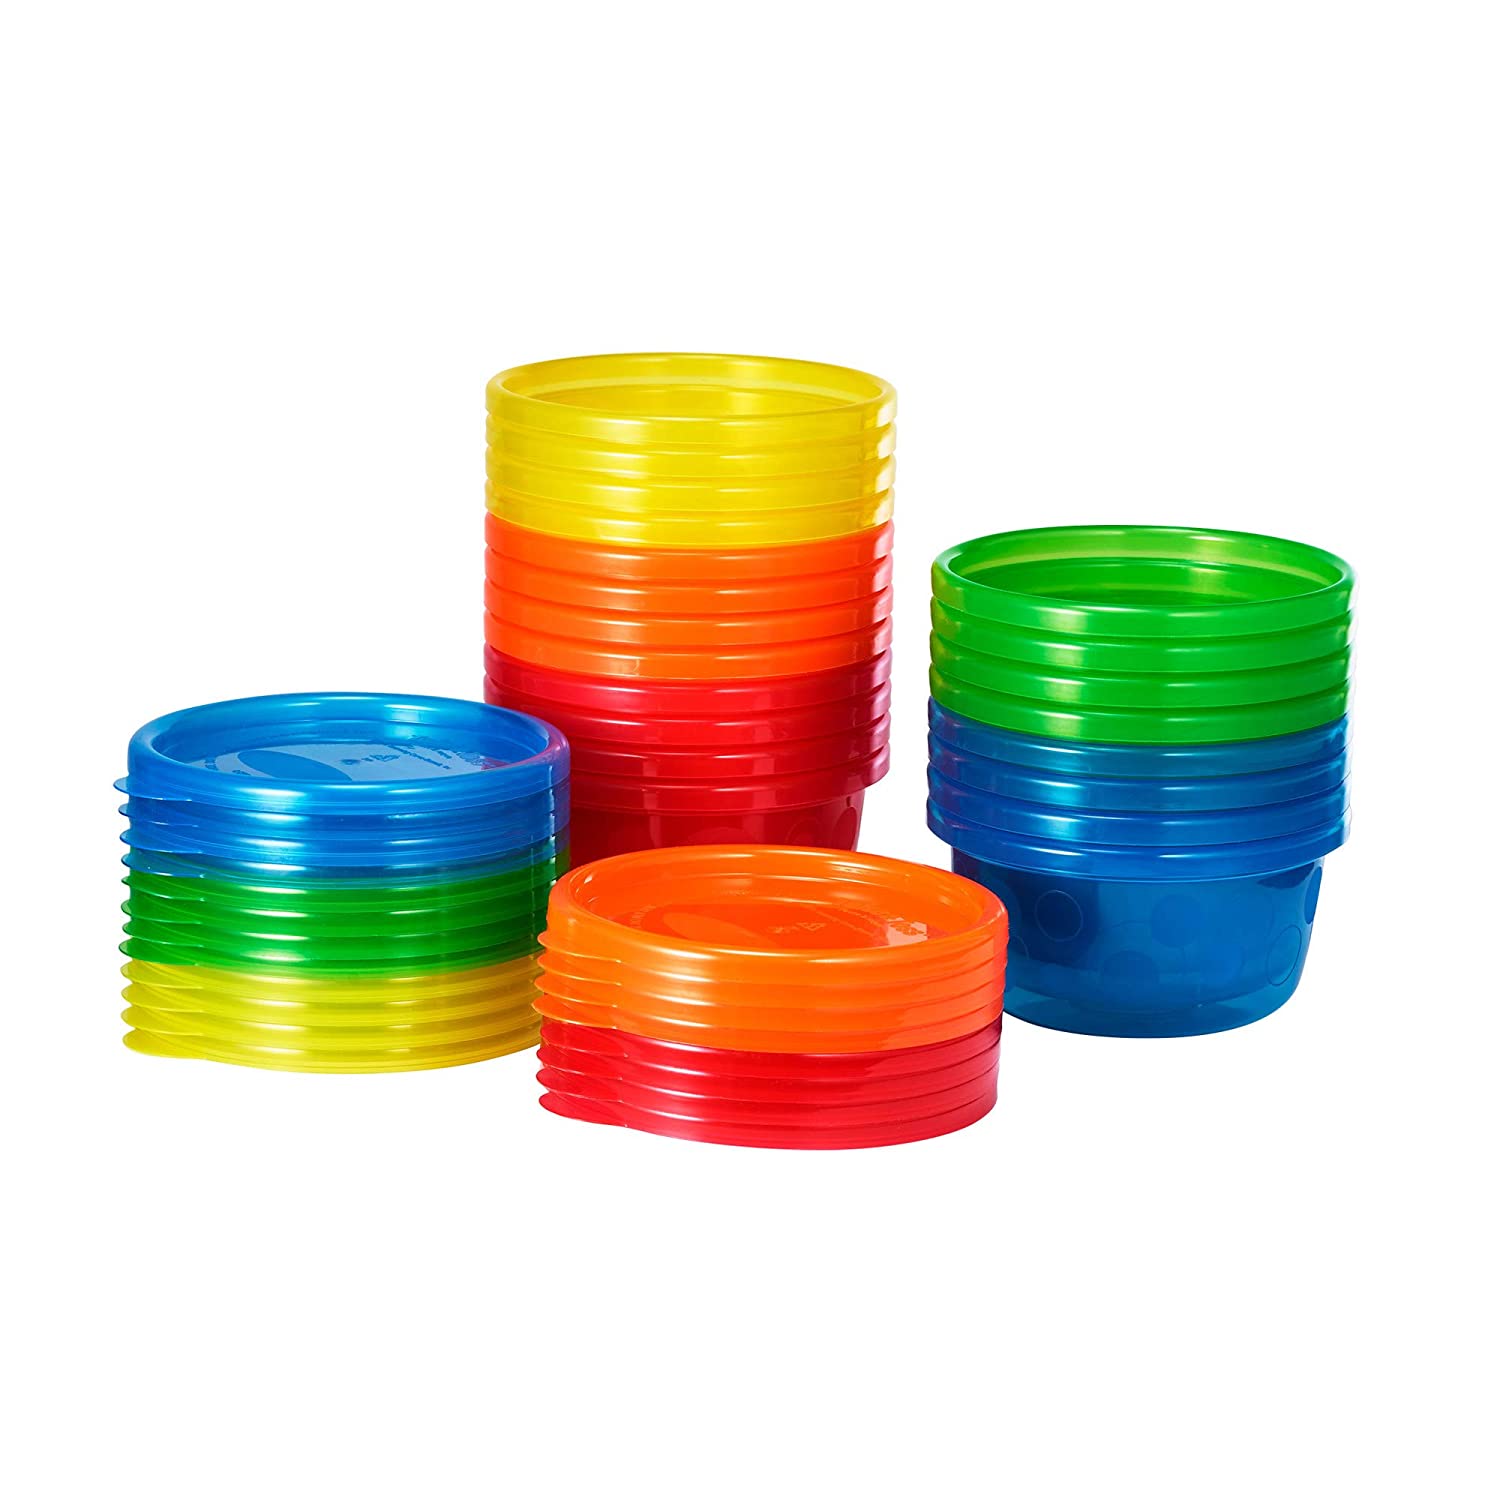 https://cdn.shopify.com/s/files/1/1300/6865/products/The-First-Years-Take-Toss-8oz-Bowls-20-Pack-9m-THE-FIRST-YEARS.jpg?v=1656639053&width=1500